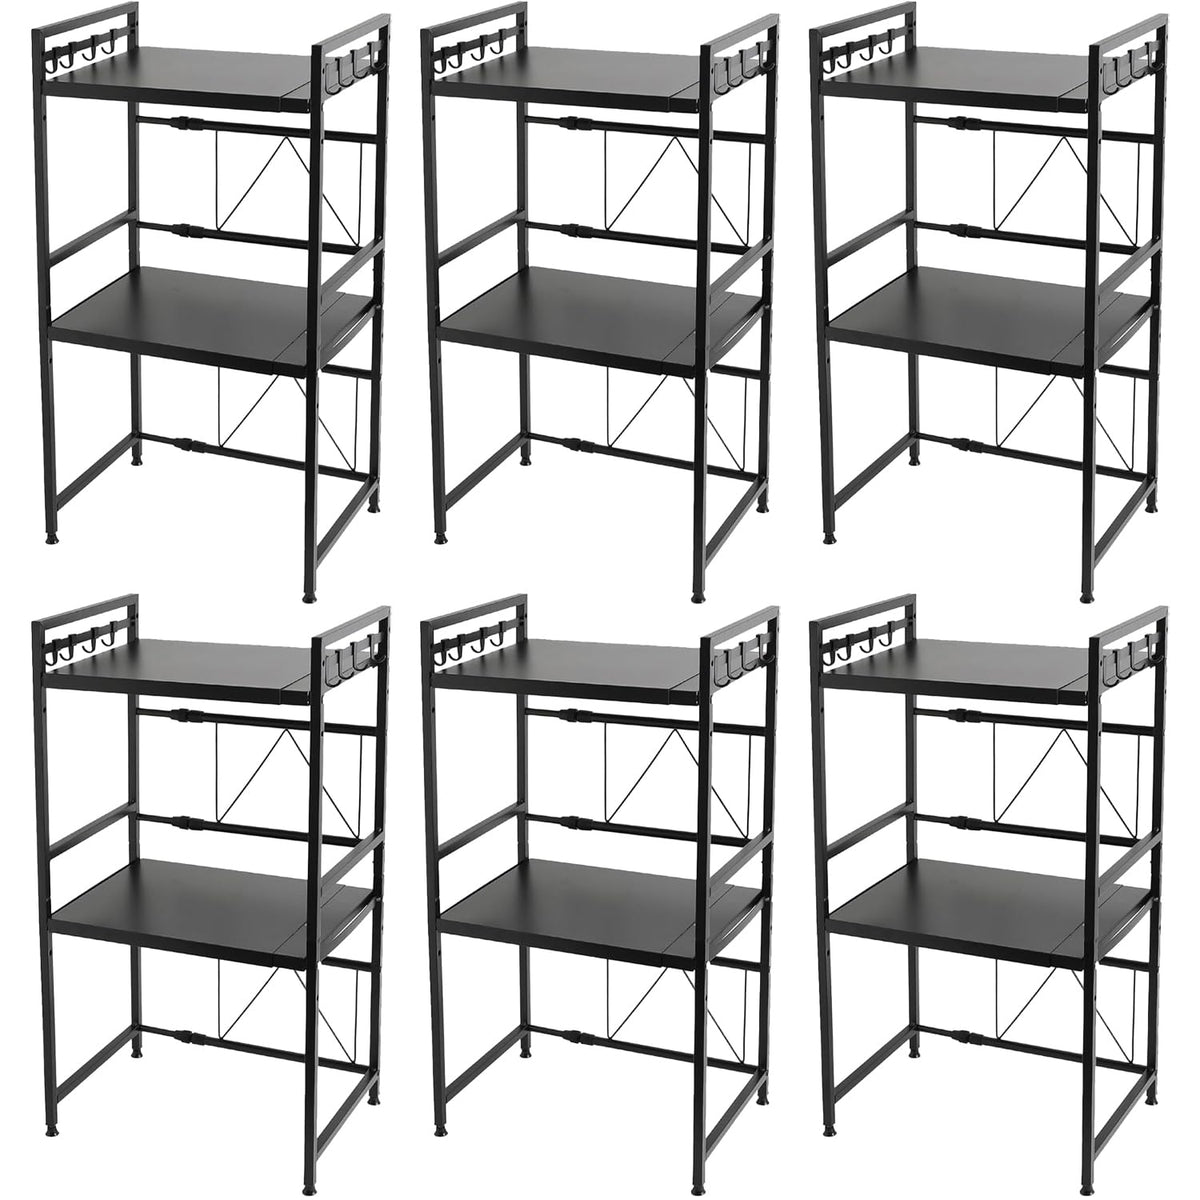 Kuber Industries 2-Layer Microwave Oven Rack|Telescopic Storage Rack|Microwave Shelf Stand With Hanging Hooks|Kitchen Counter Shelf Organizer Pack of 6 (Black)